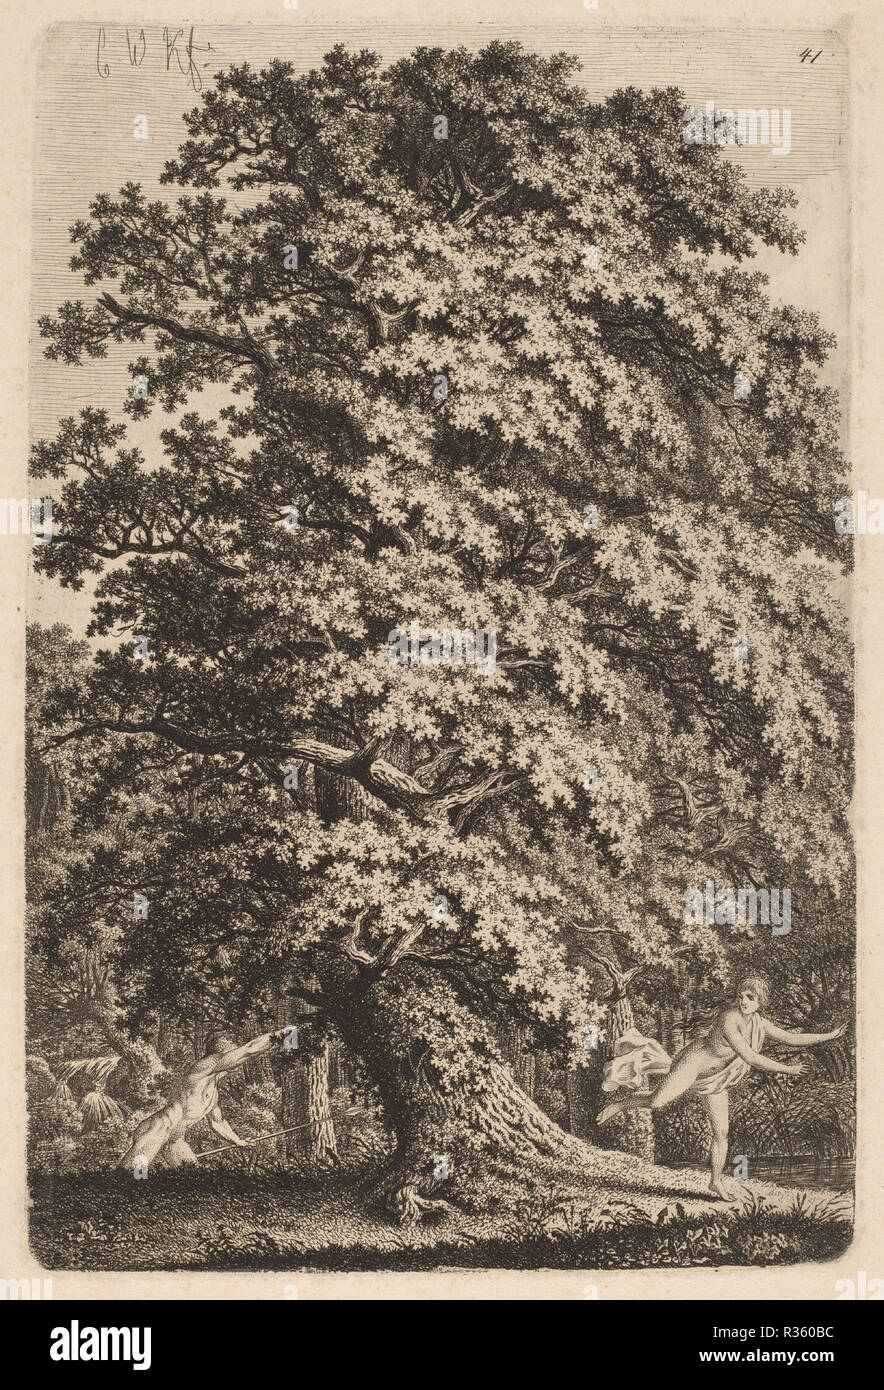 A Large Oak Tree in Gehölz. A Young Man with a Spear Follows a Young Girl. Dated: c.1800. Dimensions: plate: 26.4 x 17.5 cm (10 3/8 x 6 7/8 in.)  sheet: 29.7 x 21.7 cm (11 11/16 x 8 9/16 in.). Medium: etching on laid paper. Museum: National Gallery of Art, Washington DC. Author: Carl Wilhelm Kolbe. Stock Photo